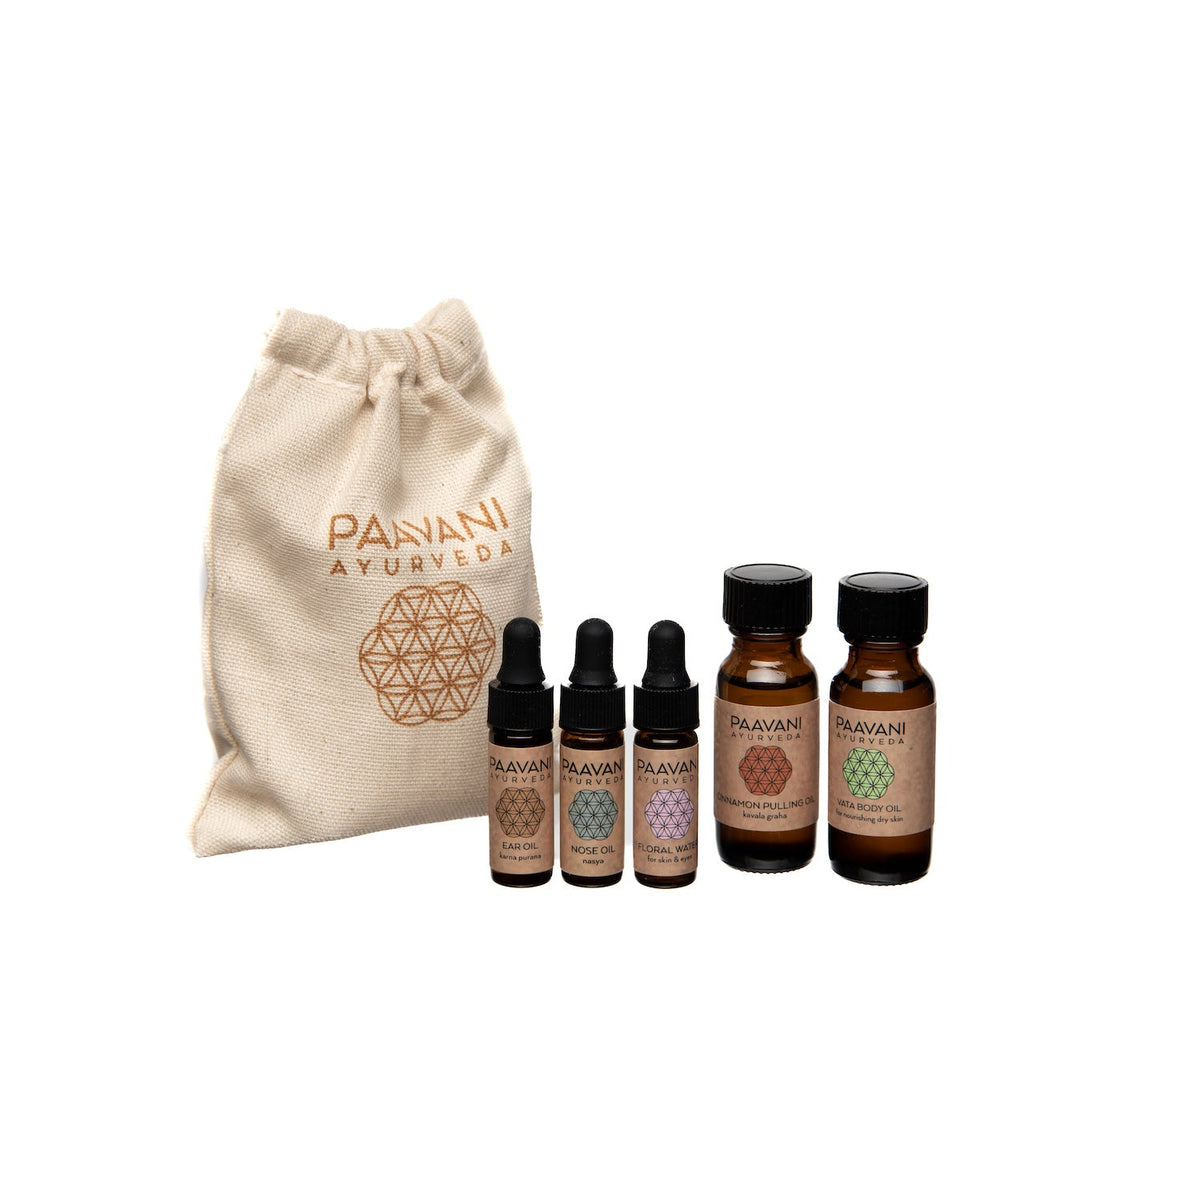 * Paavani Ayurveda - The Dinacharya Ritual including Ear Oil, Body Oil, Nose Oil, Pulling Oil and Floral Water, Ayurvedic Bundle-1